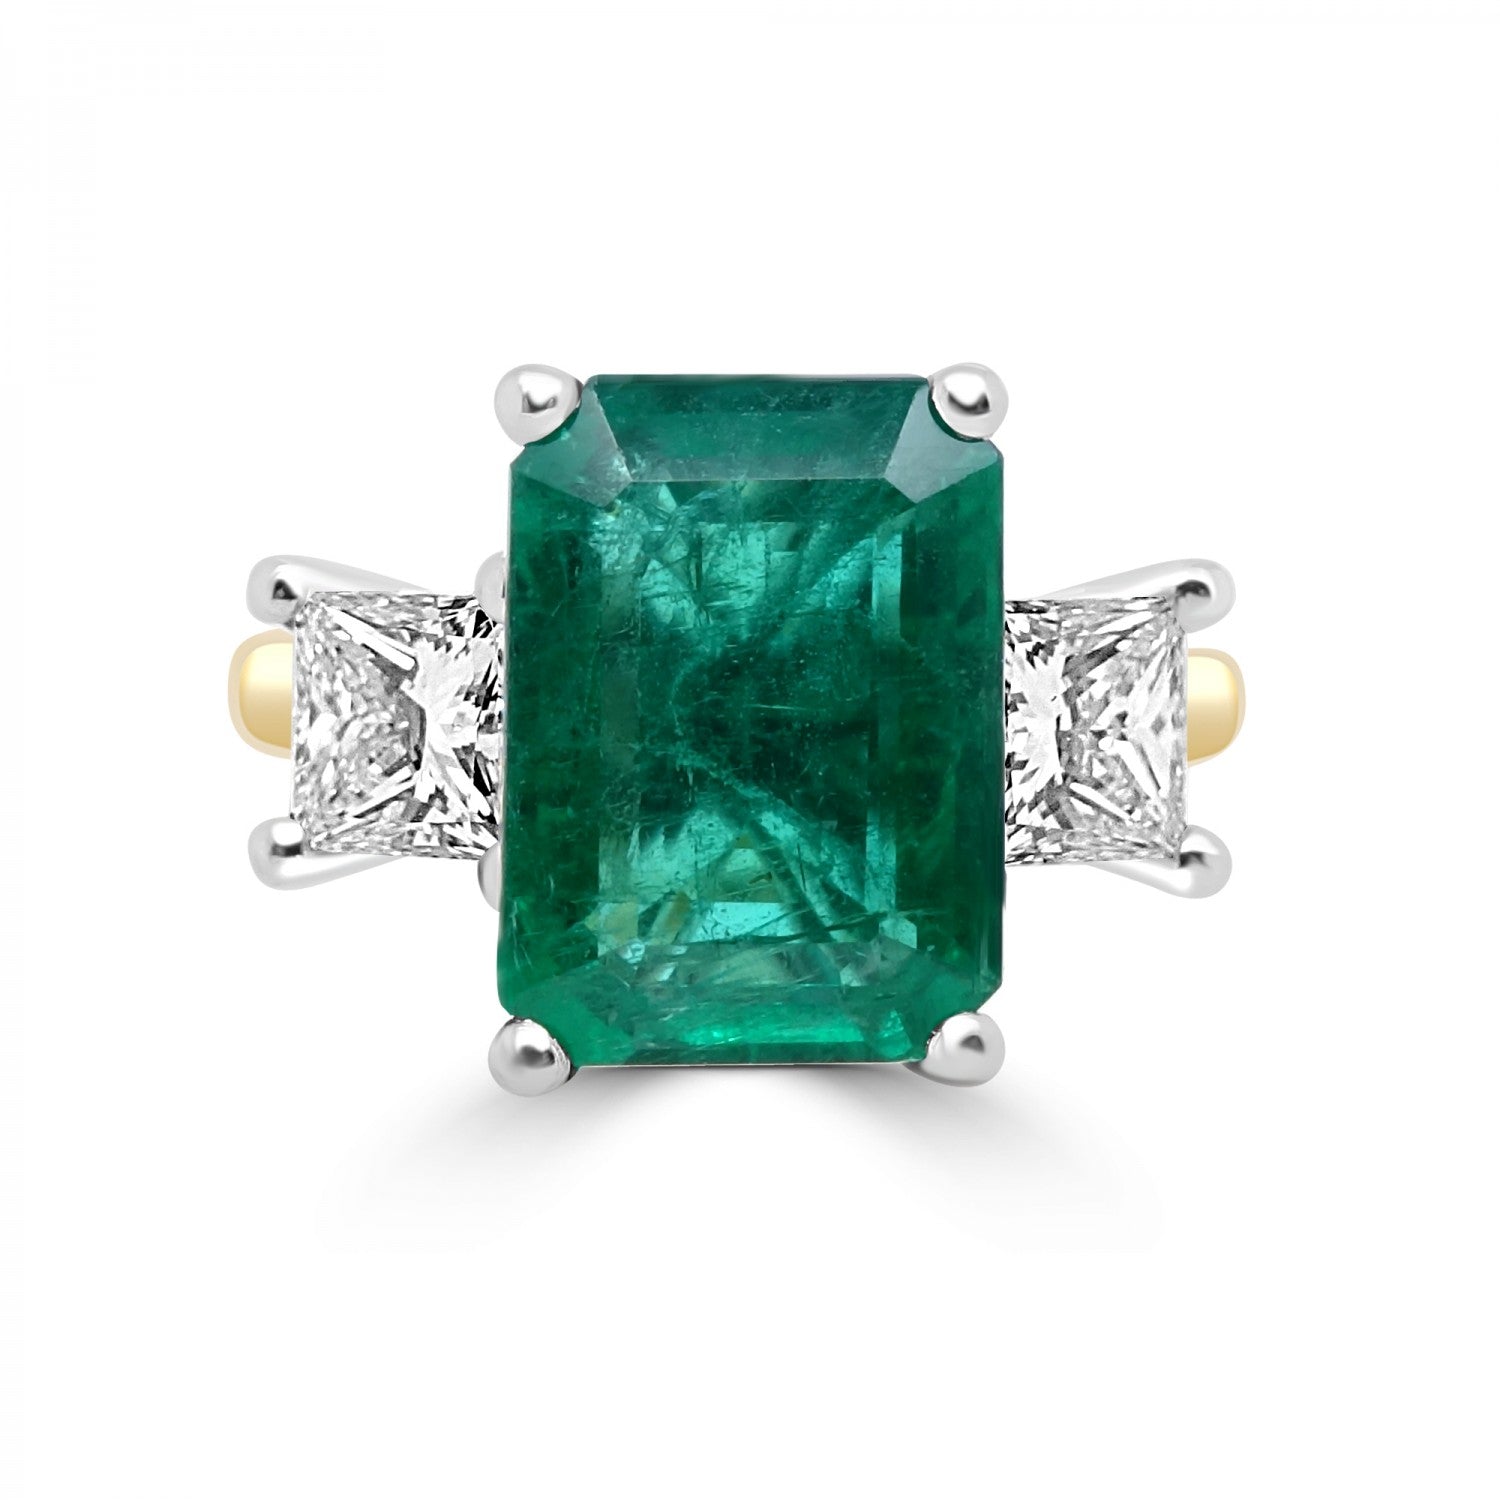 EMERALD AND DIAMOND TRILOGY ENGAGEMENT RING